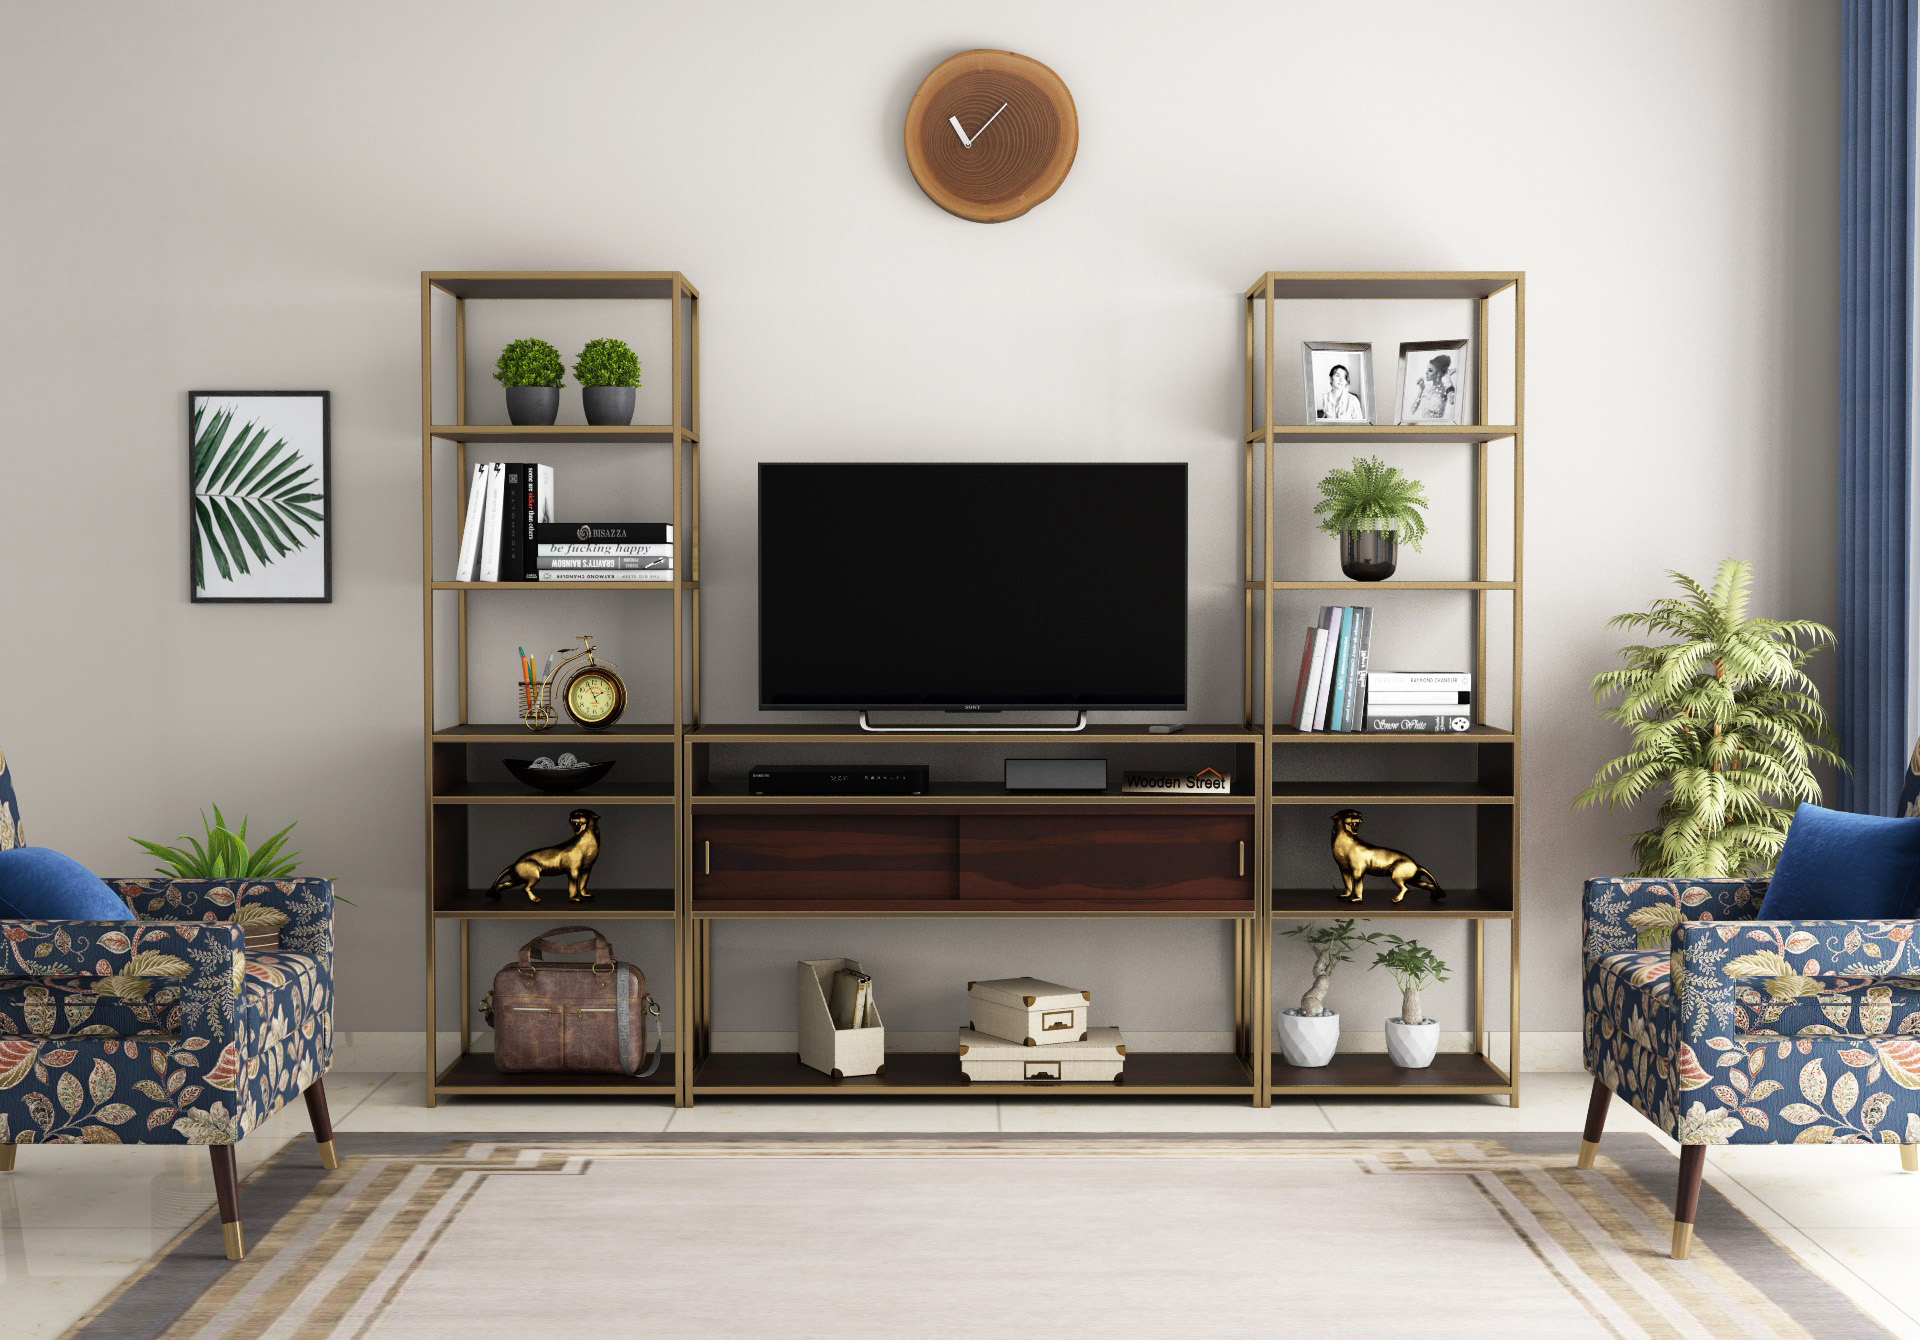 MINIMALIST TV UNIT TO BLEND WITH EVERY DECOR